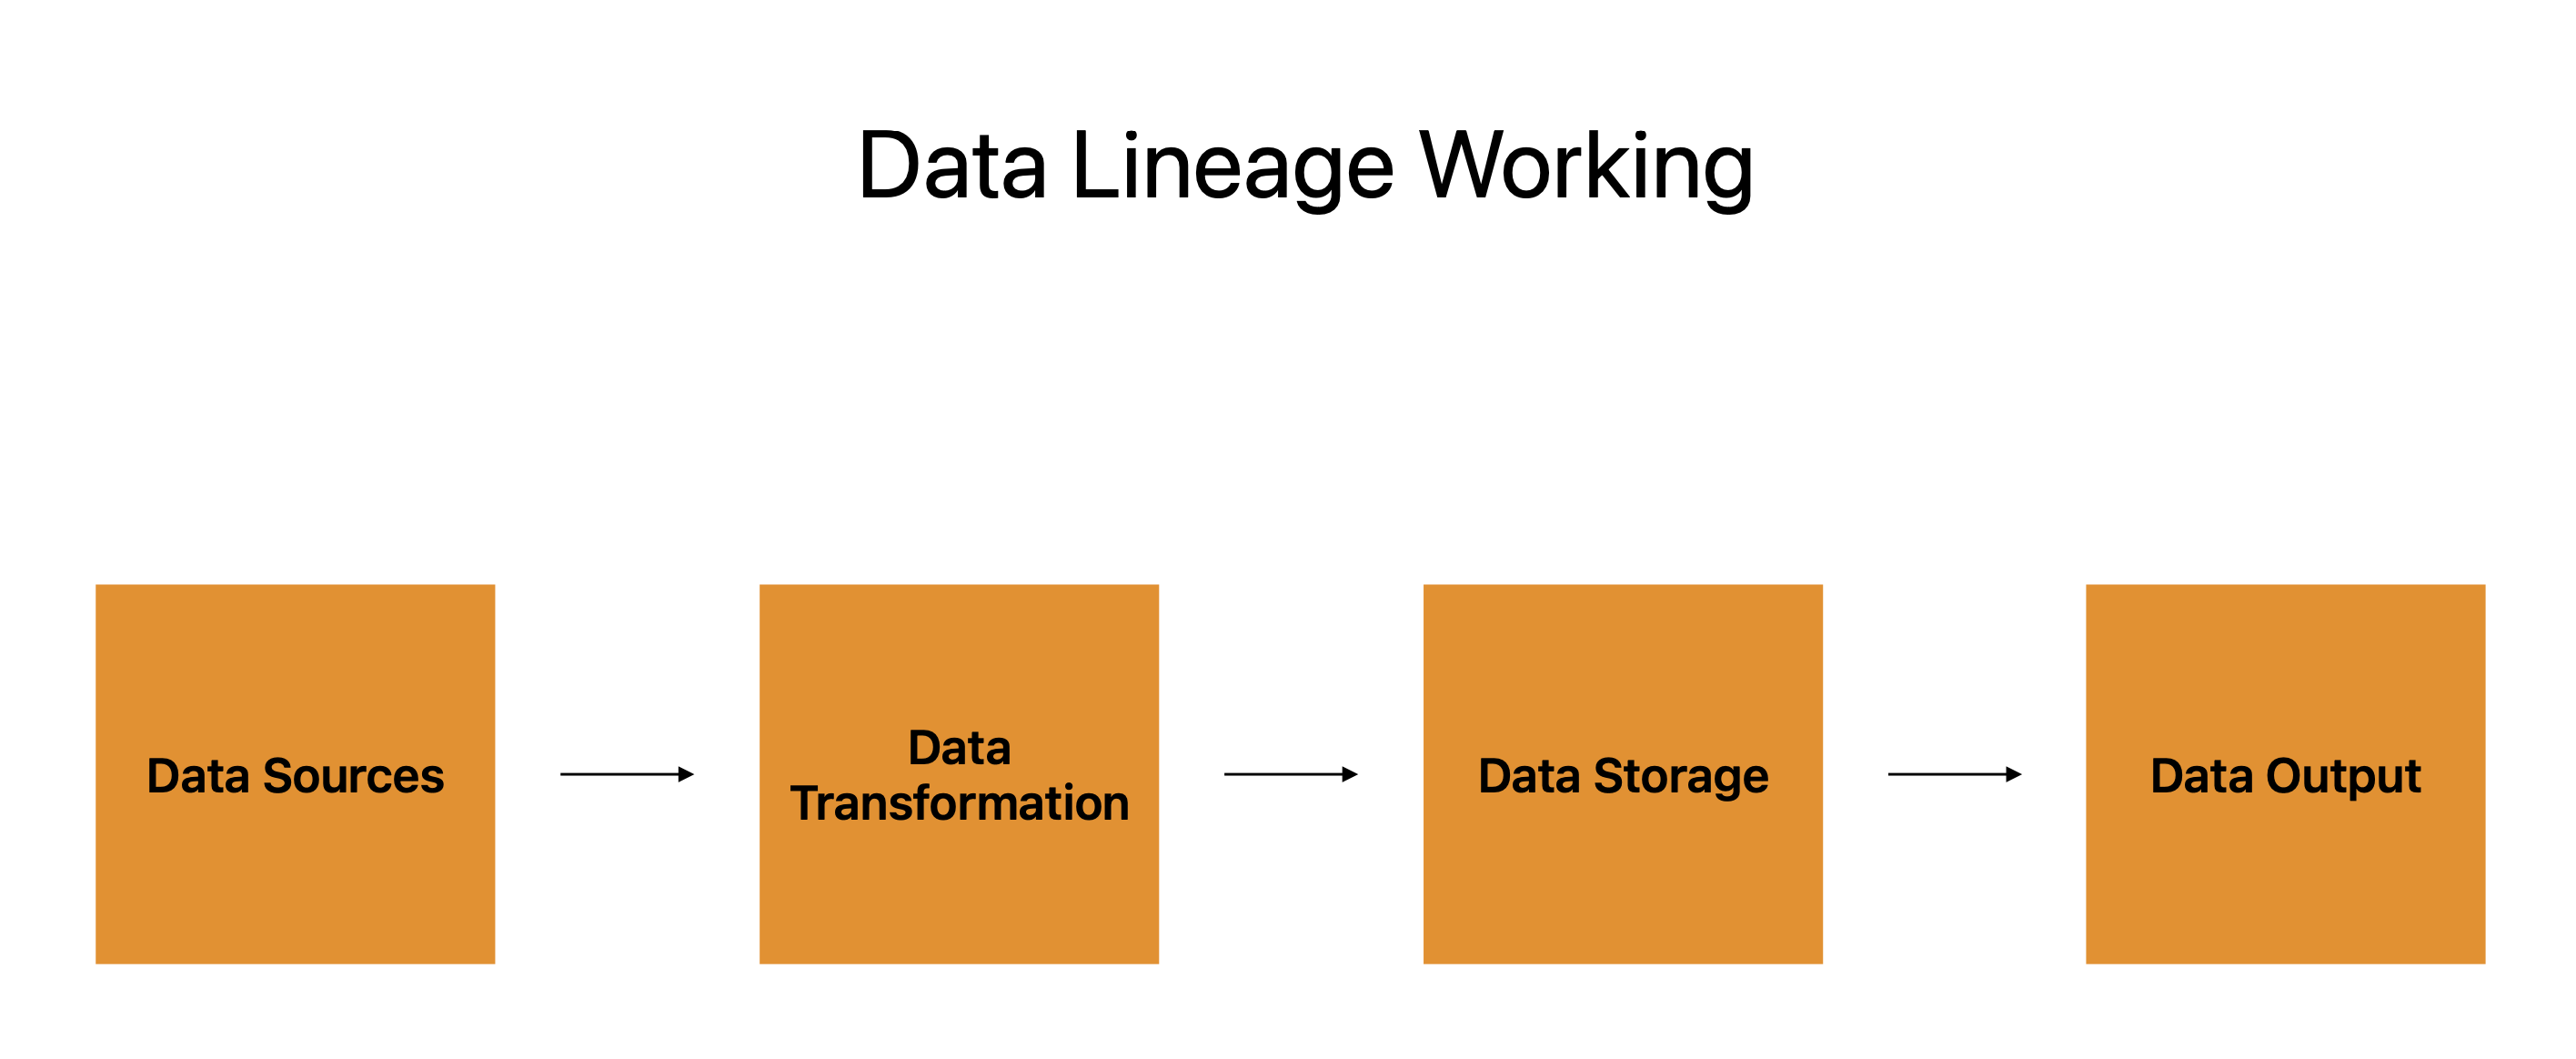 Data Lineage Working